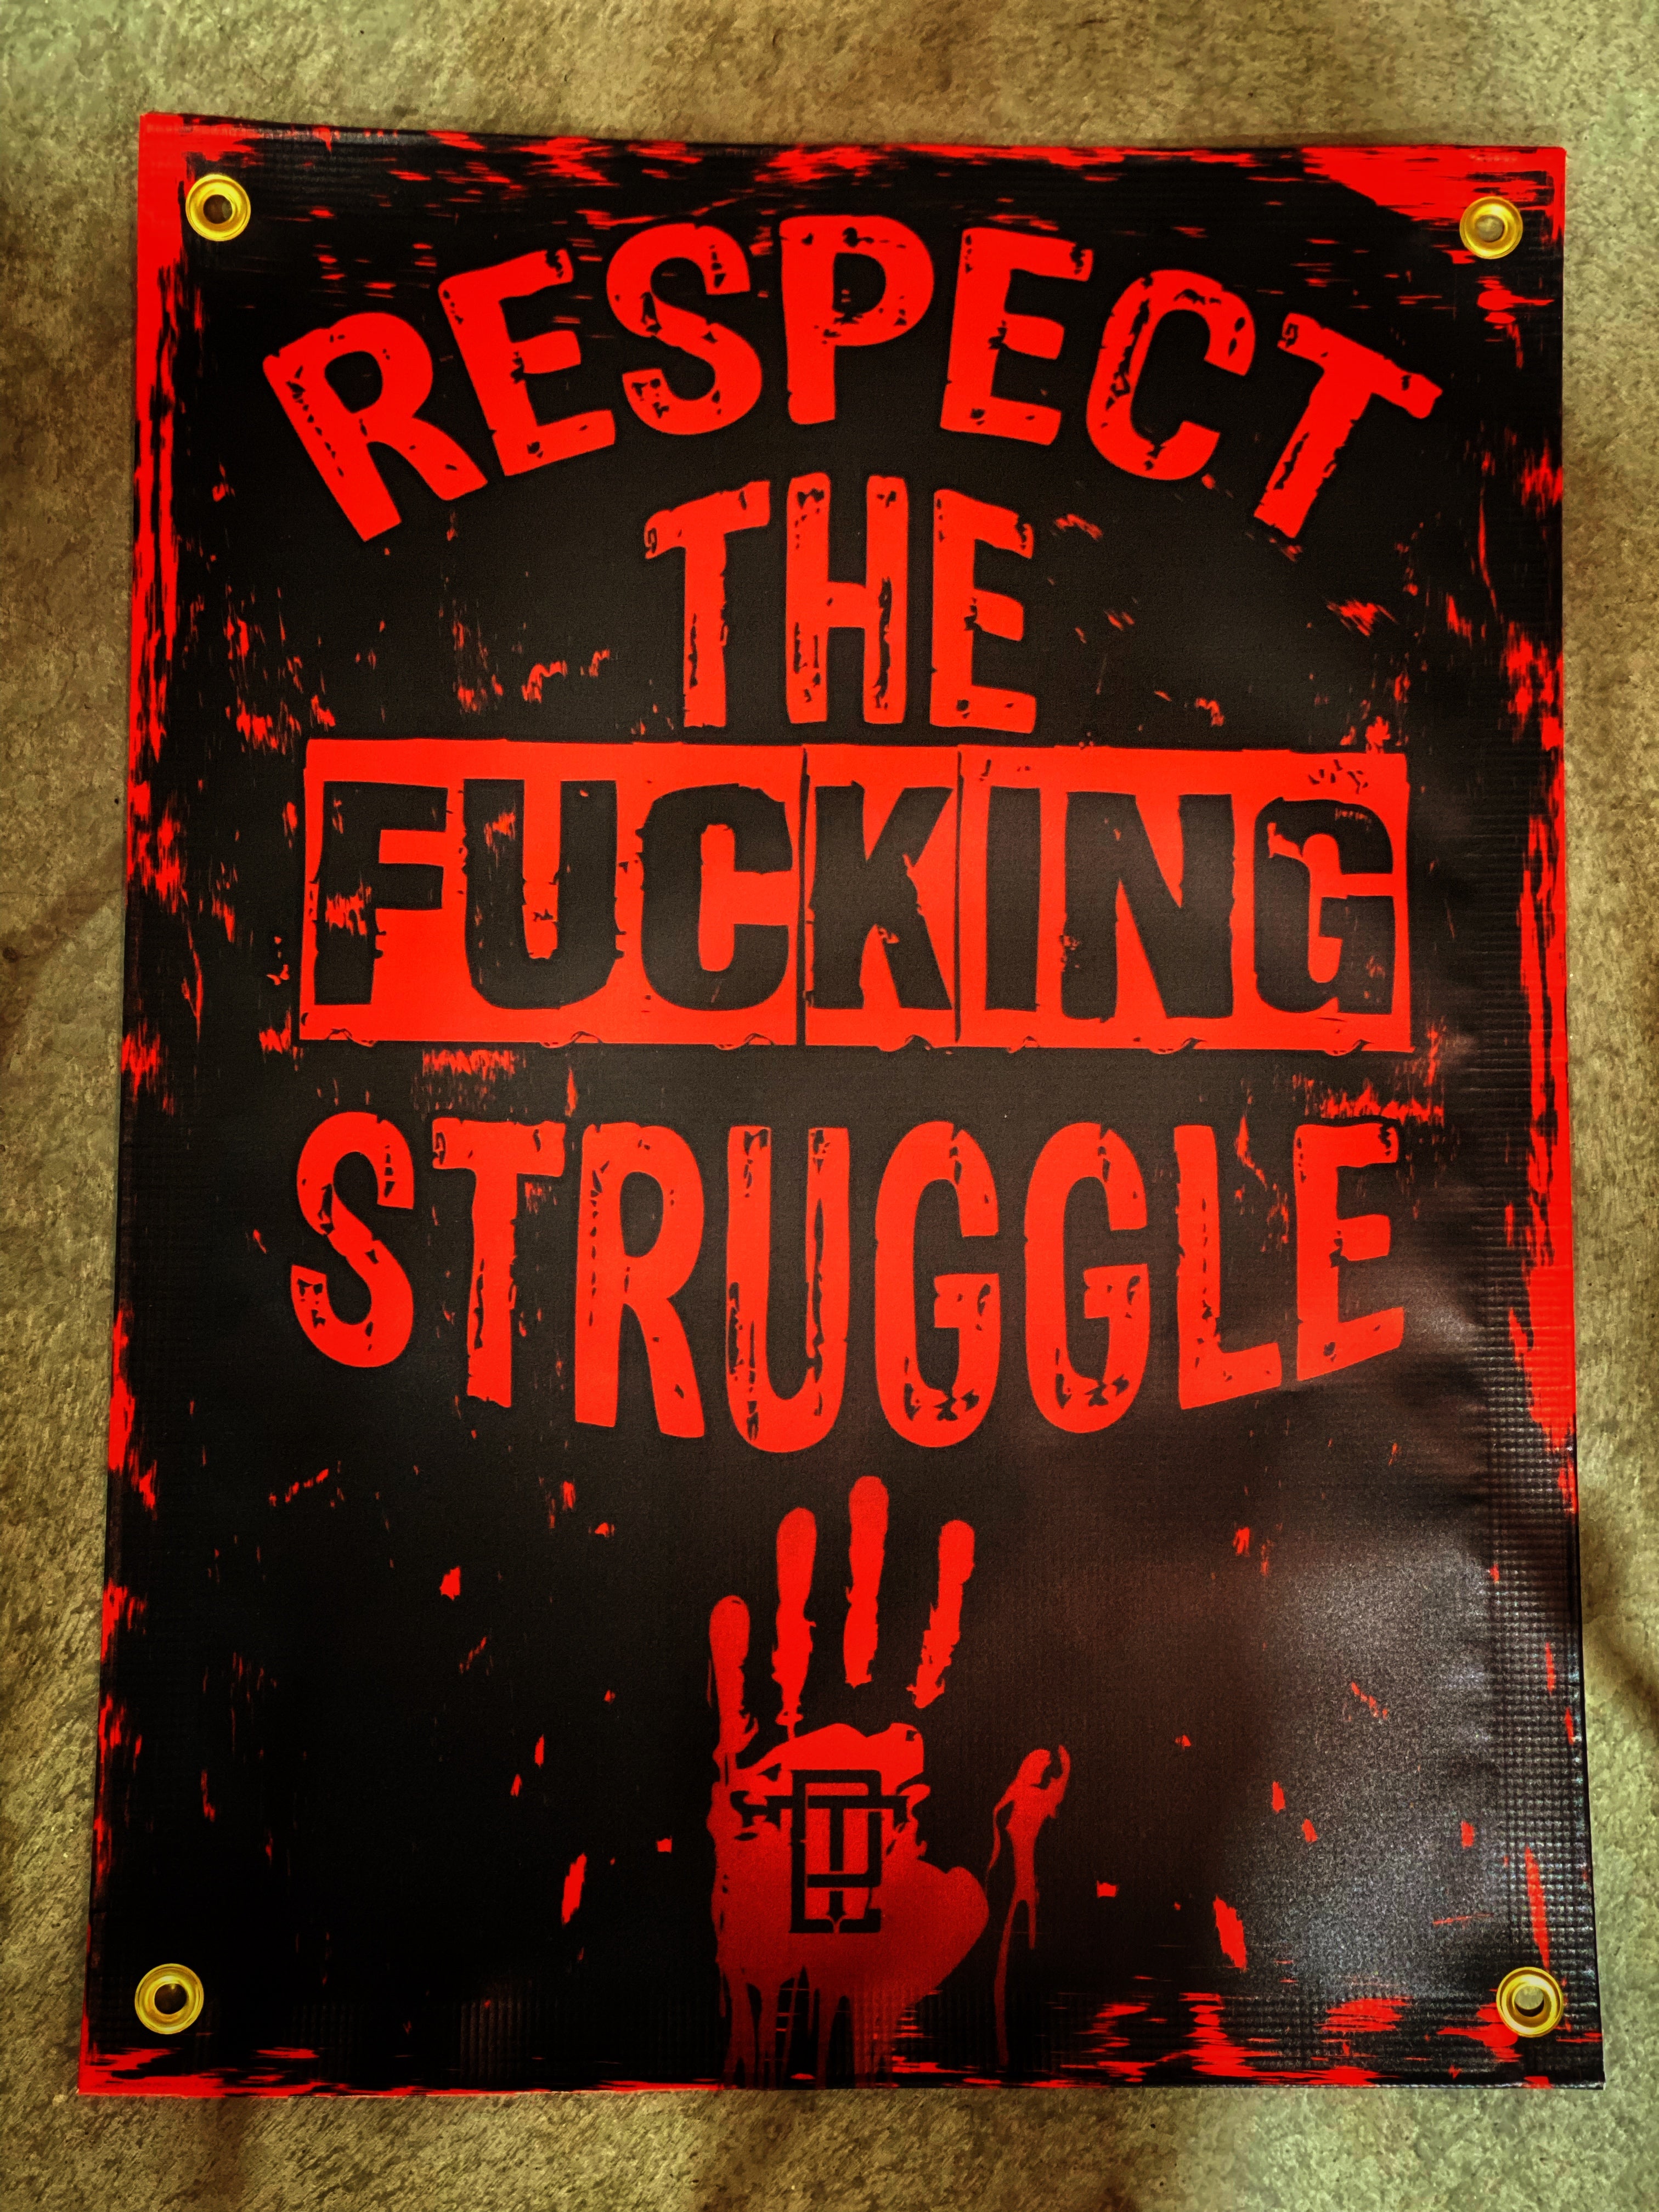 RESPECT THE STRUGGLE WALL BANNER - Dude That Lifts